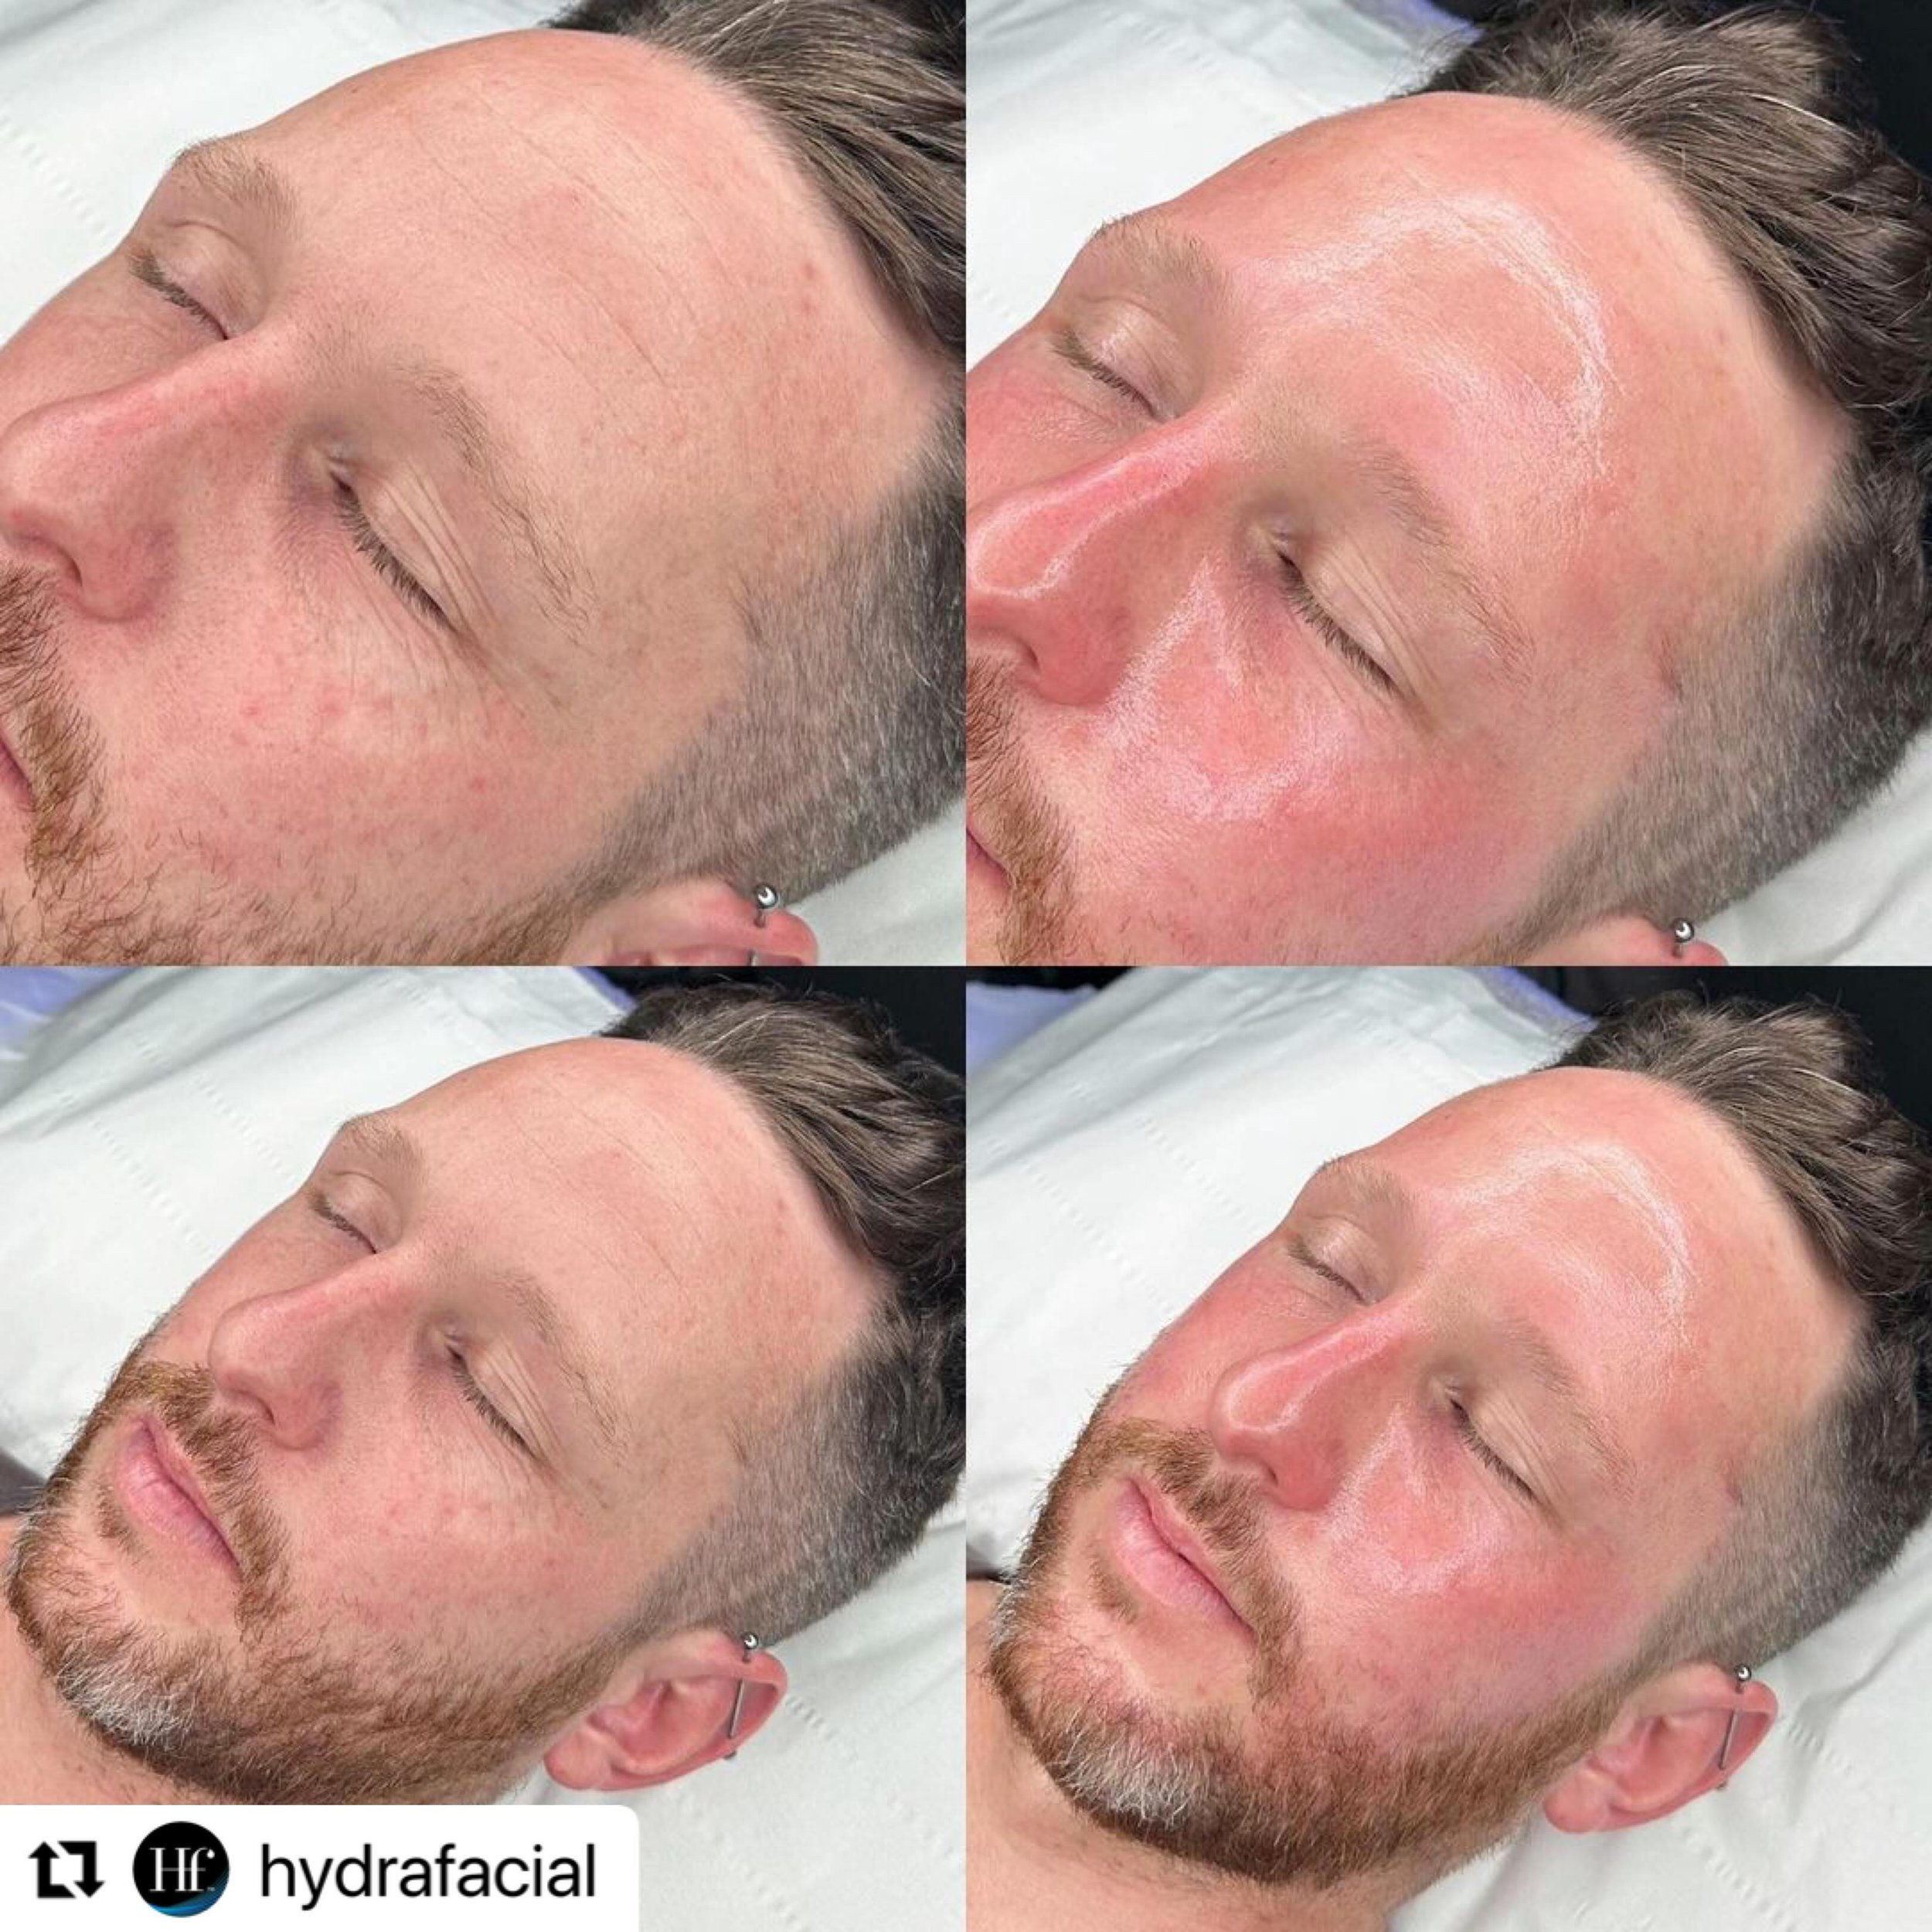 We're loving this fantastic result from our friends at @hydrafacial, the proud sponsor of the Esthetician Track at this year's Science of Skincare Summit! 💫

Learn more about Hydrafacial and our other #SSS2024 sponsors, and register today to join us